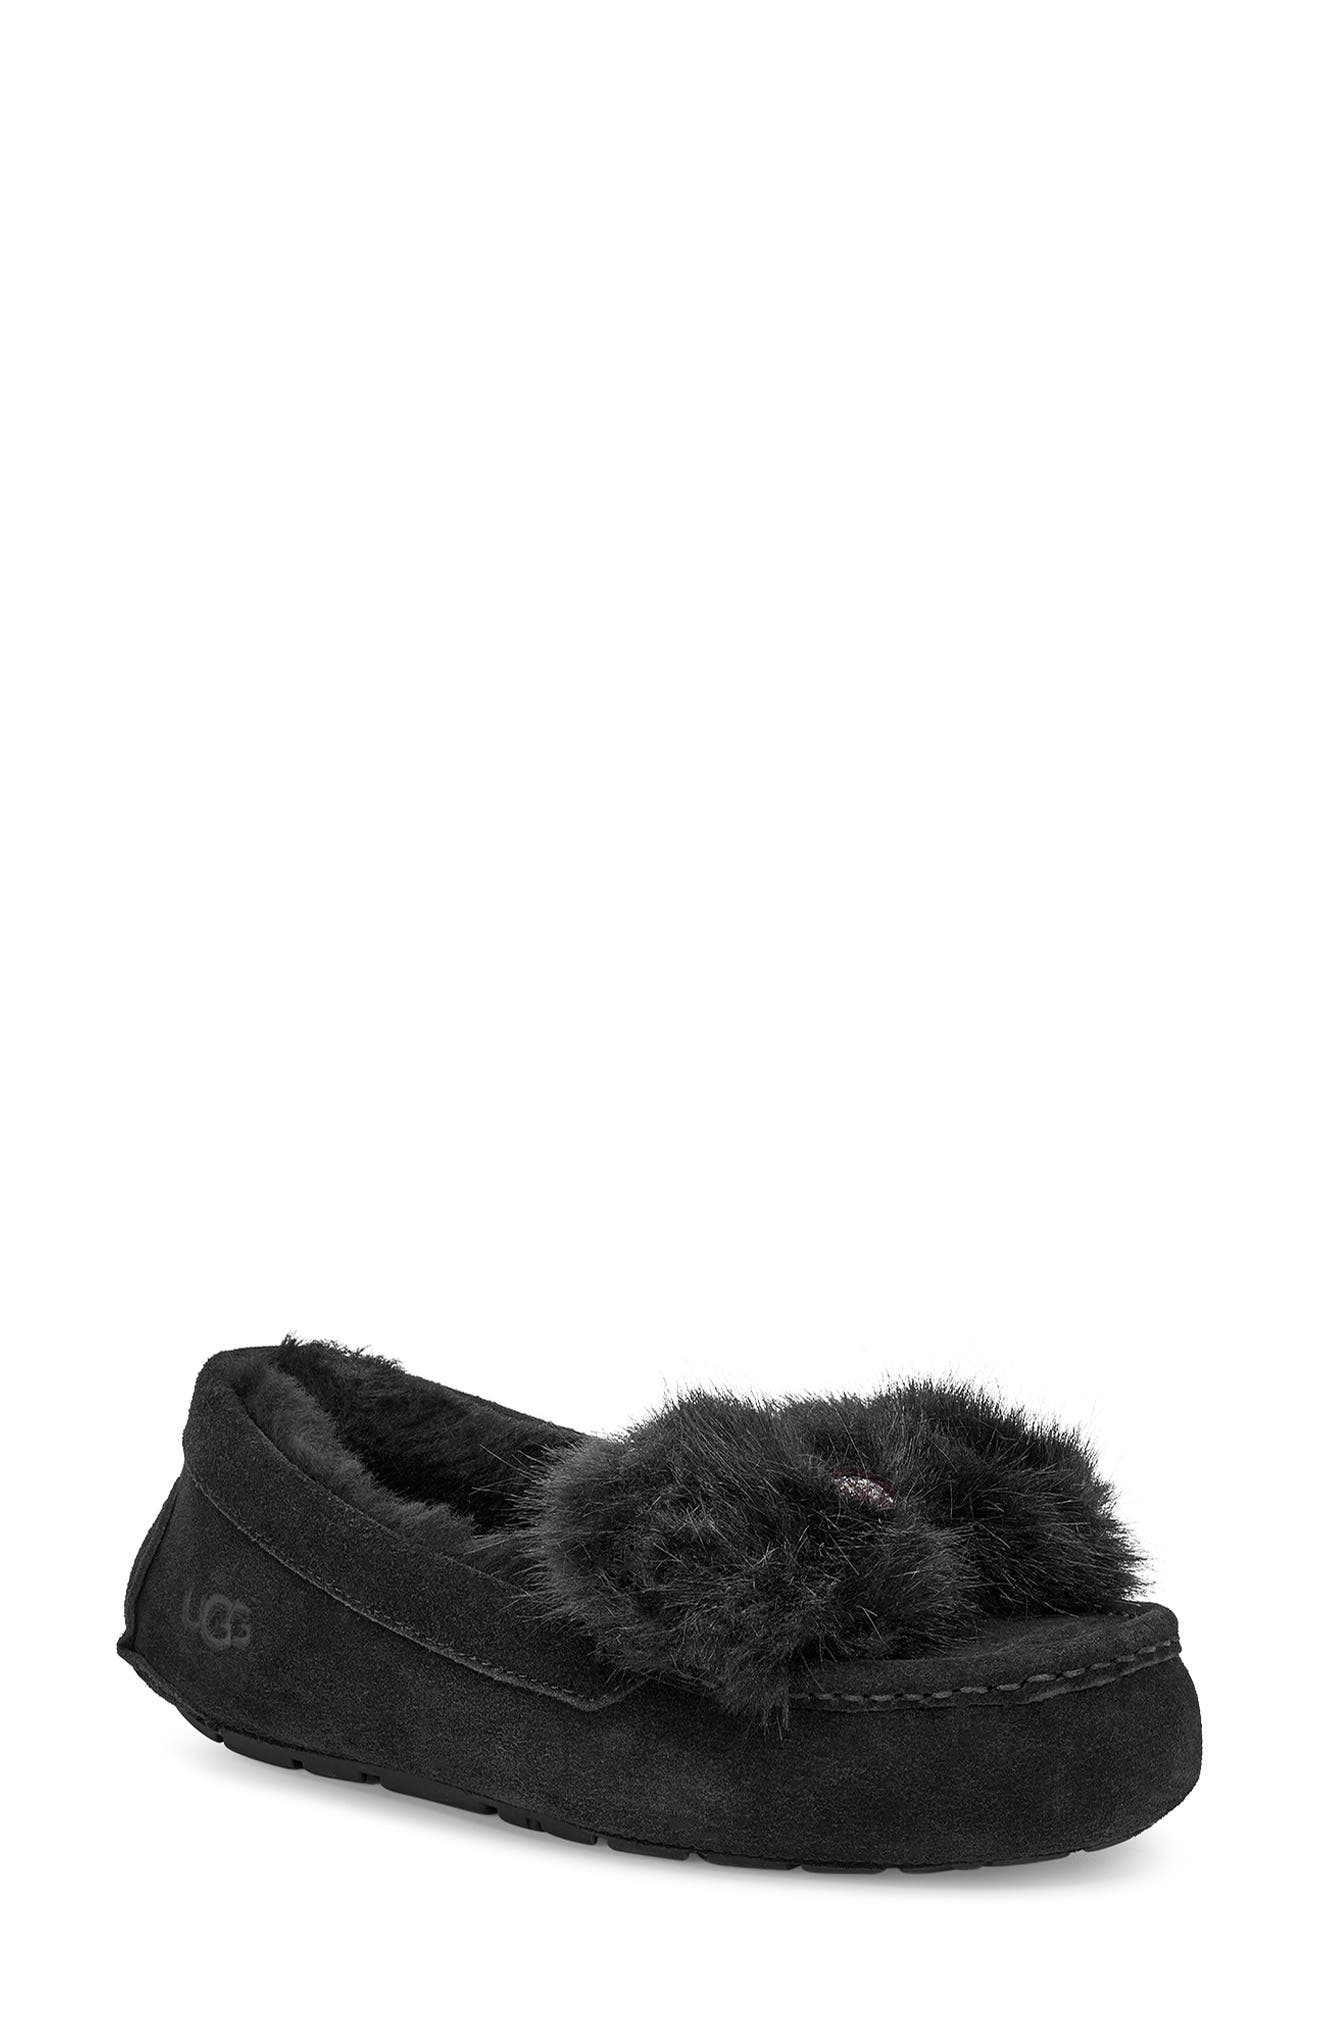 bow ugg slippers